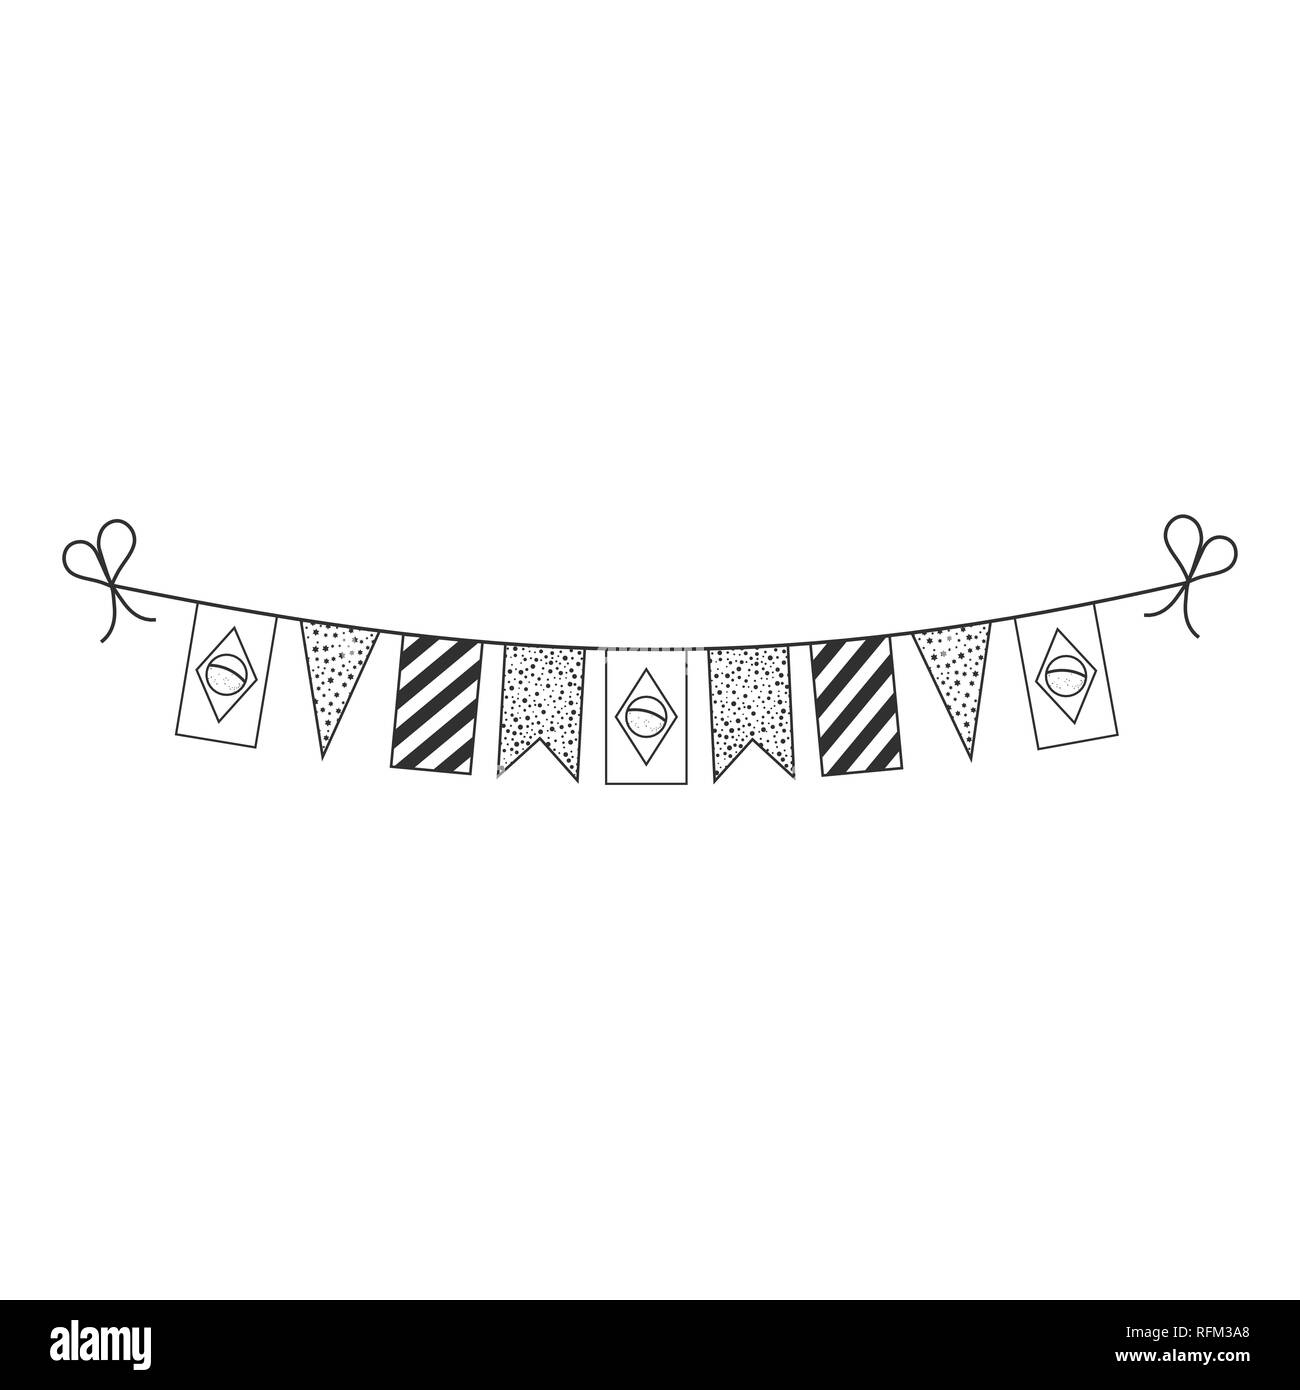 Decorations bunting flags for Brazil national day holiday in black outline flat design. Independence day or National day holiday concept. Stock Vector